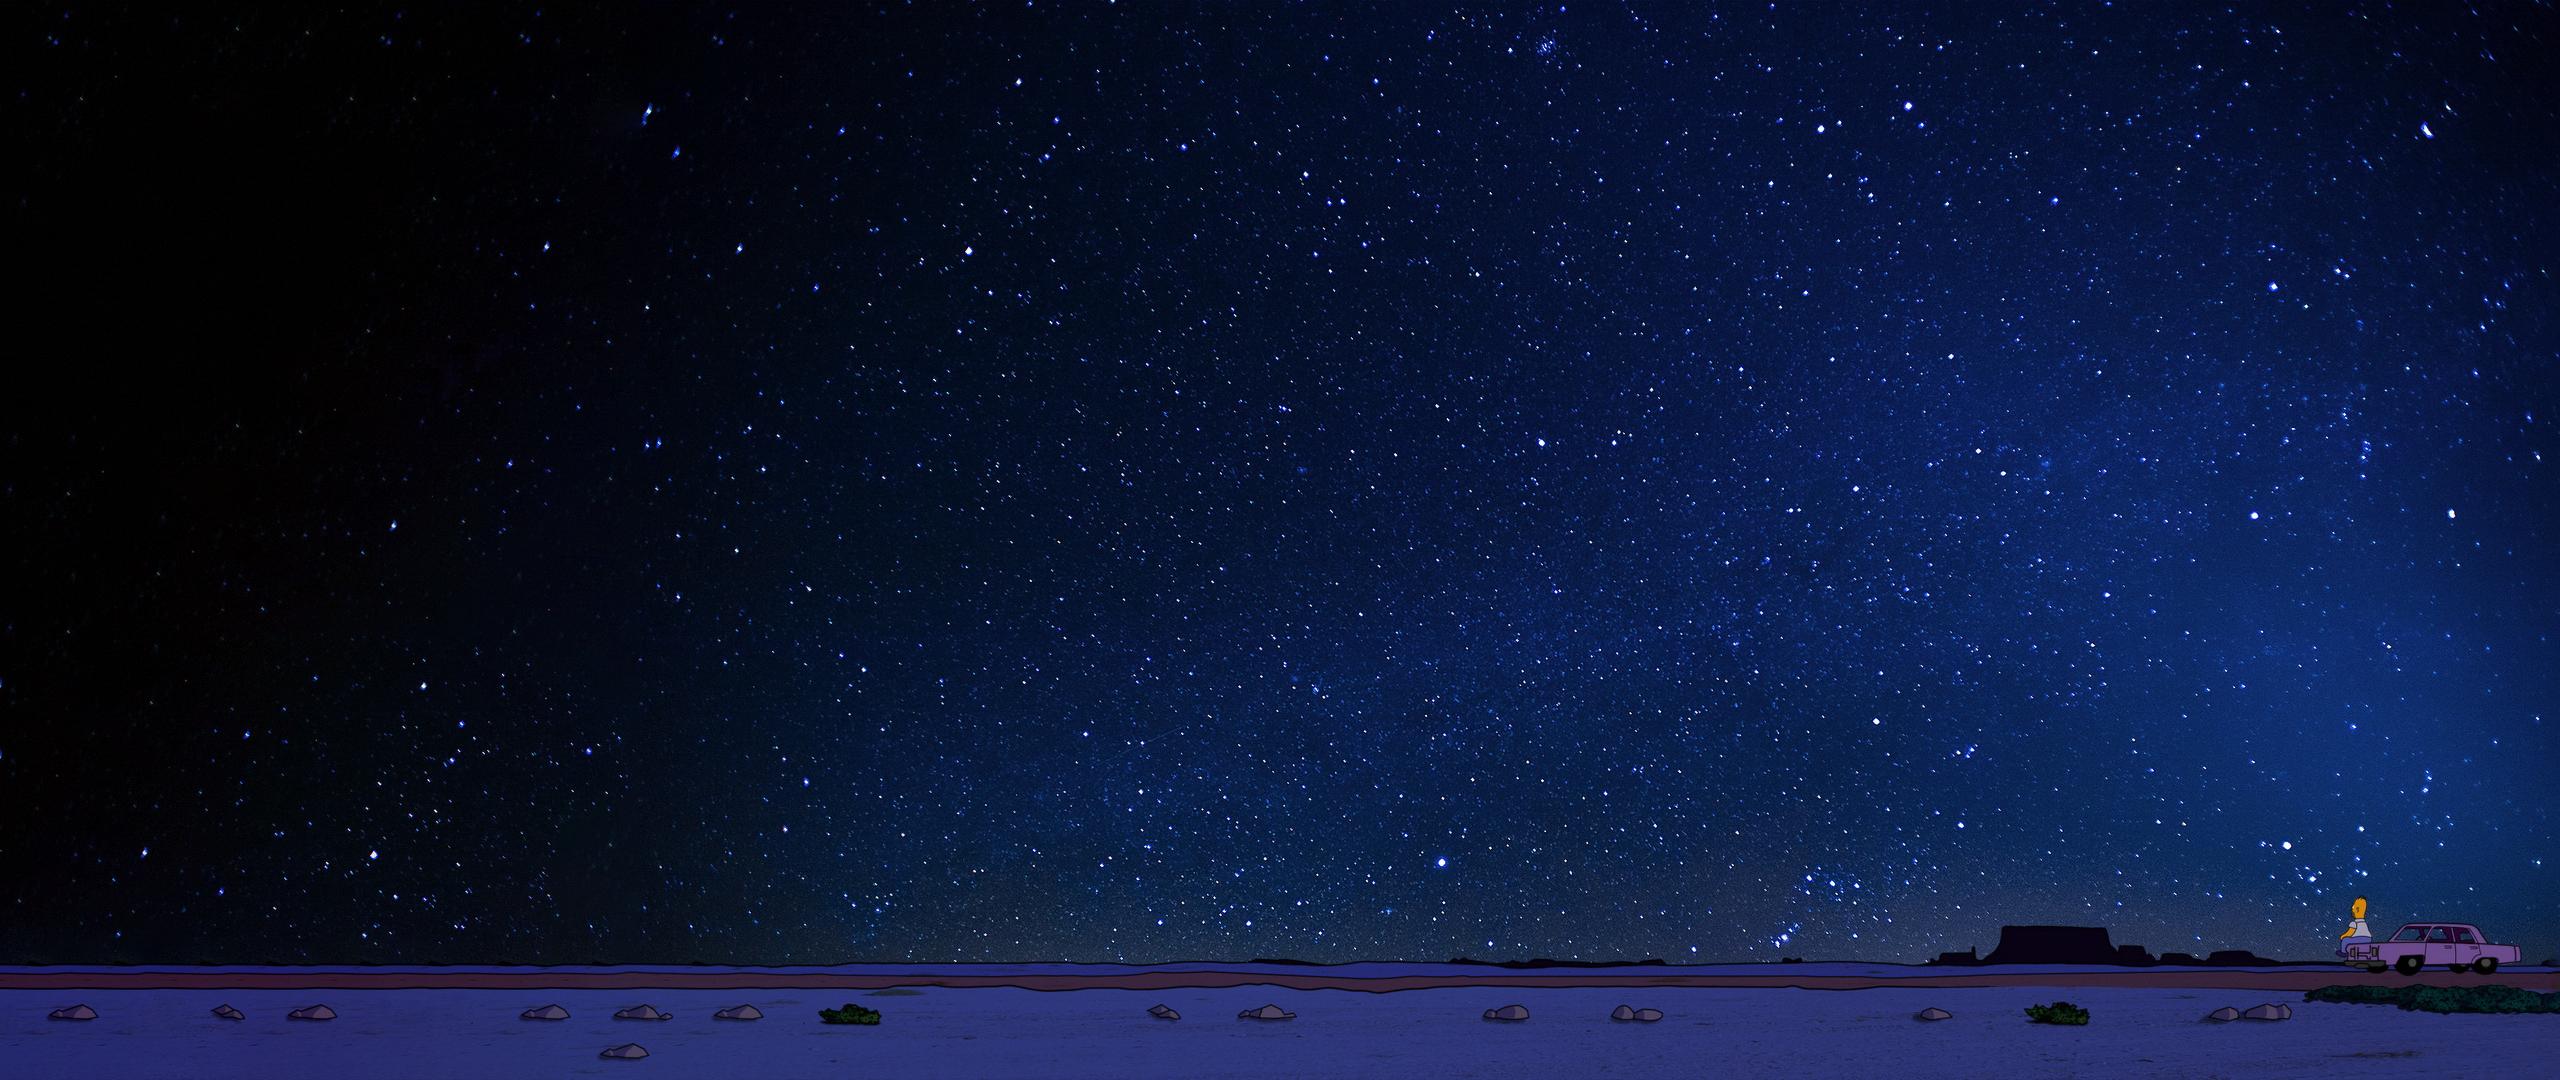 Homer looking at stars Image - ID: 223262 - Image Abyss